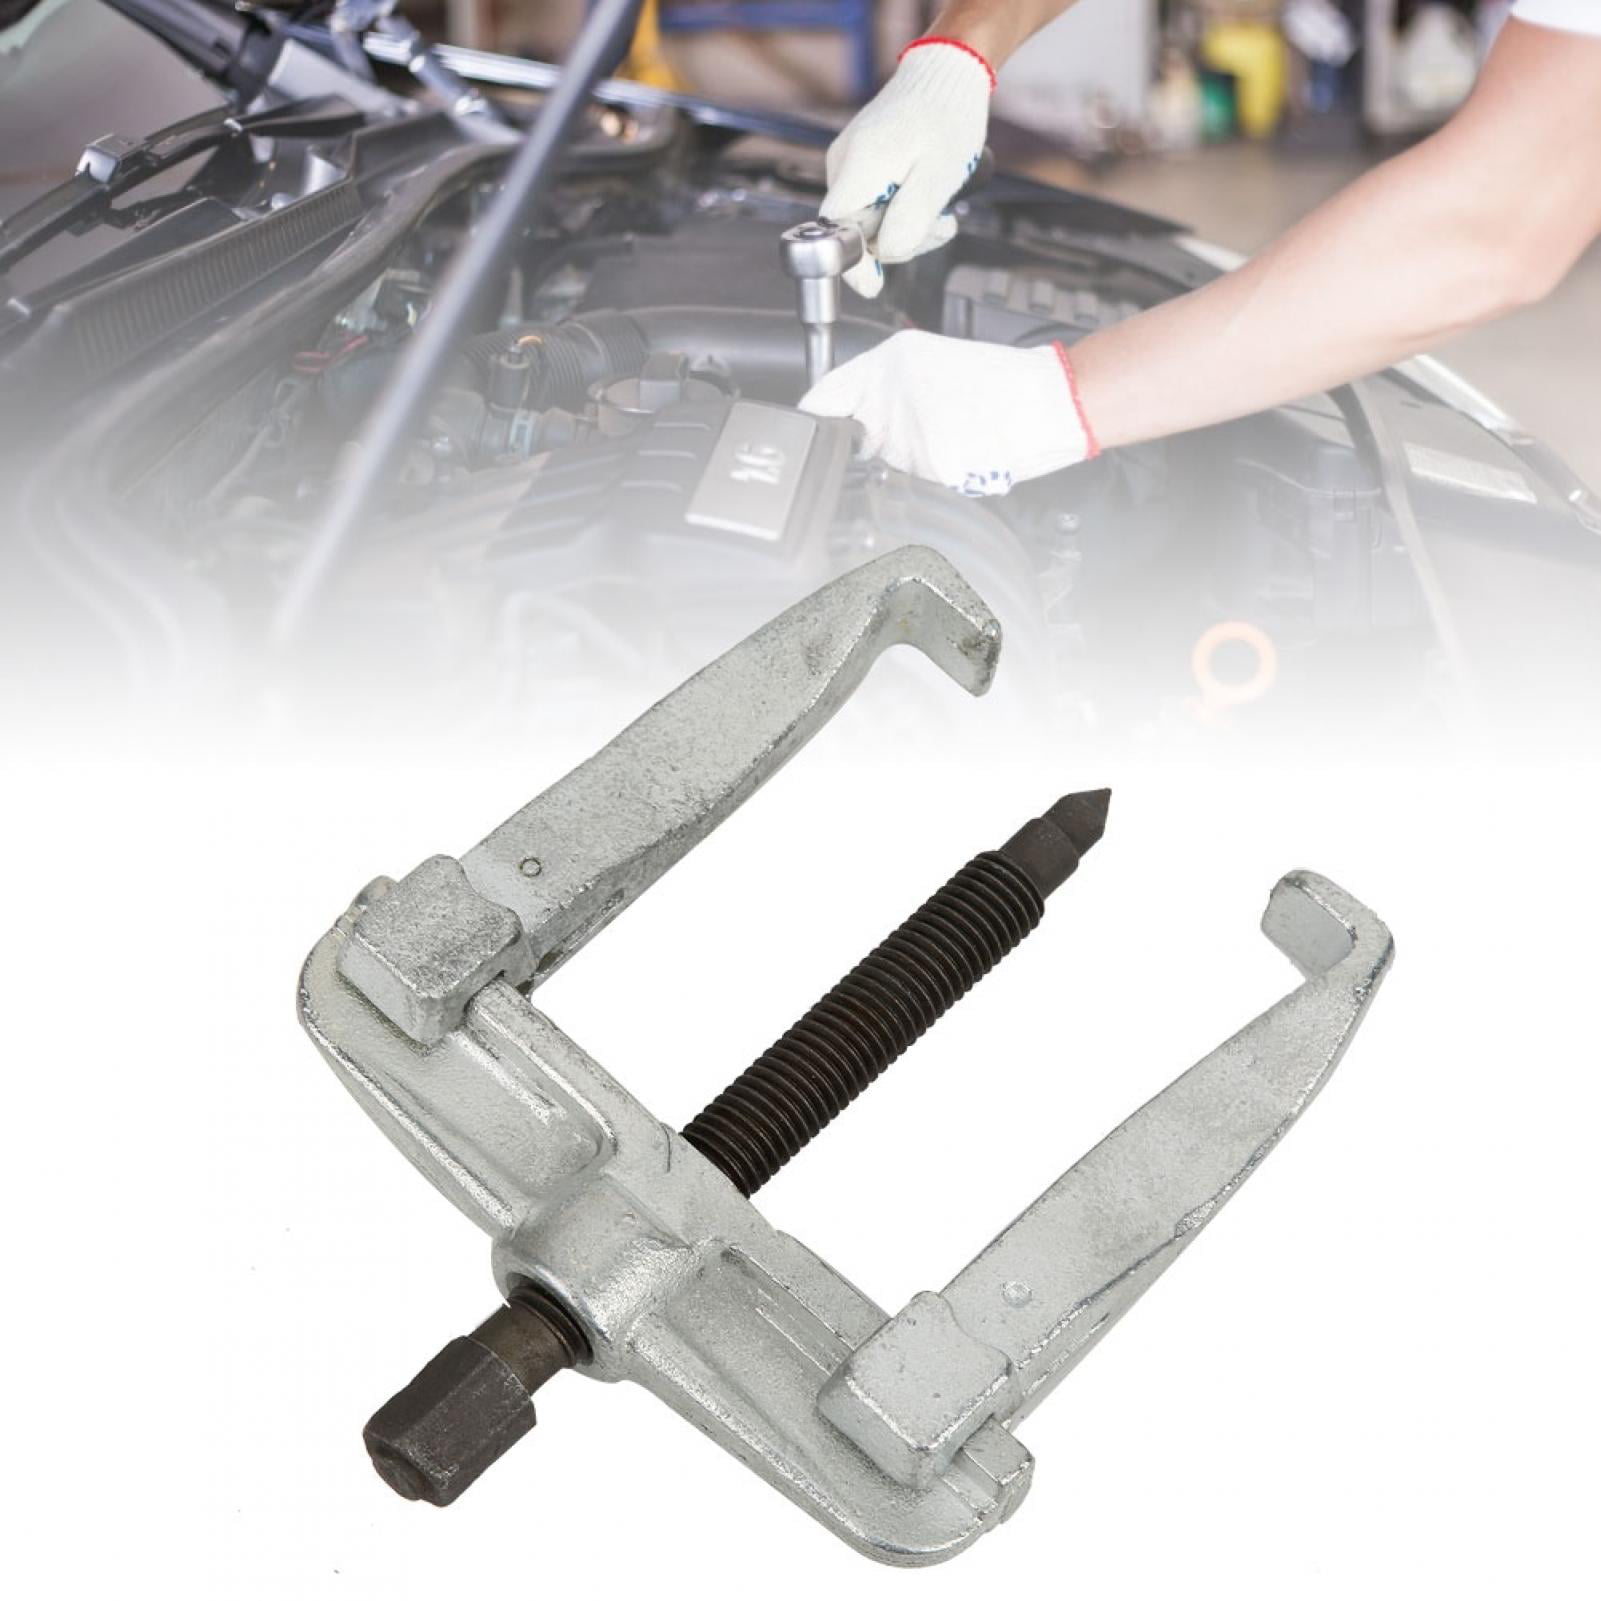 Details about   Safety Not Easy To Break 2 Jaws Bearing Puller Repair Tool Quite Flexibl Sturdy 